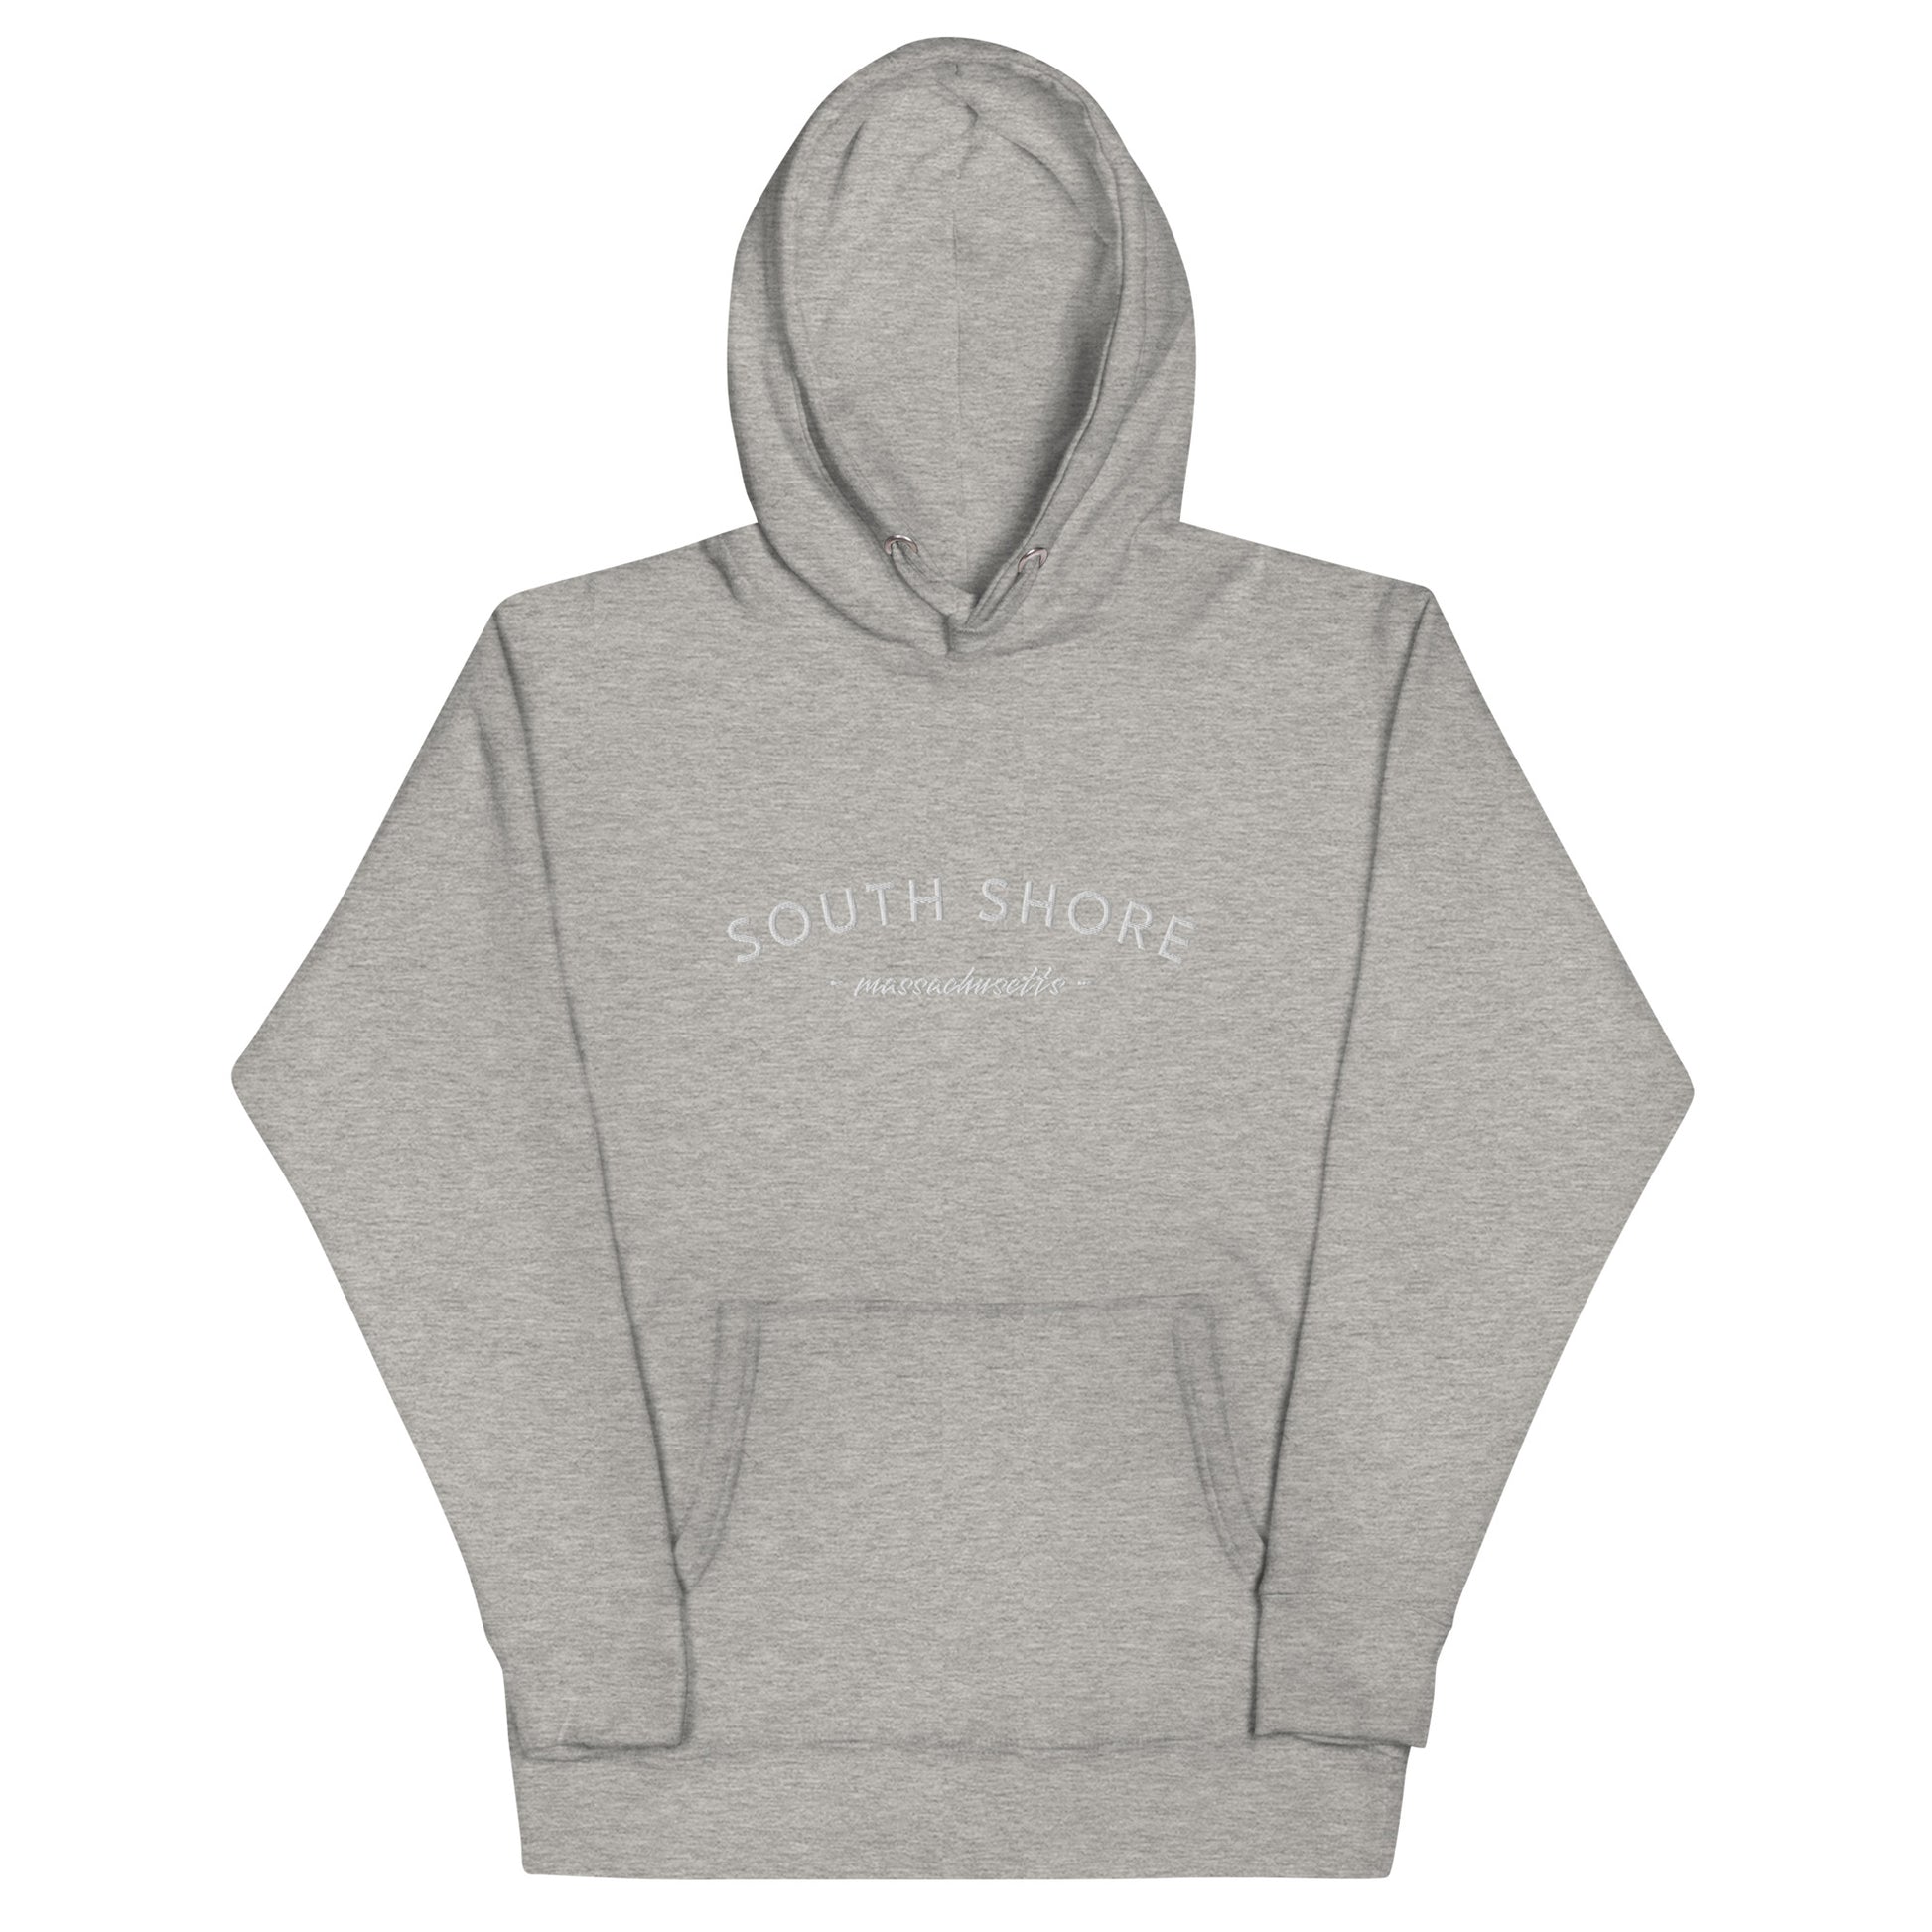 grey hoodie that says "south shore massachusetts" with white lettering